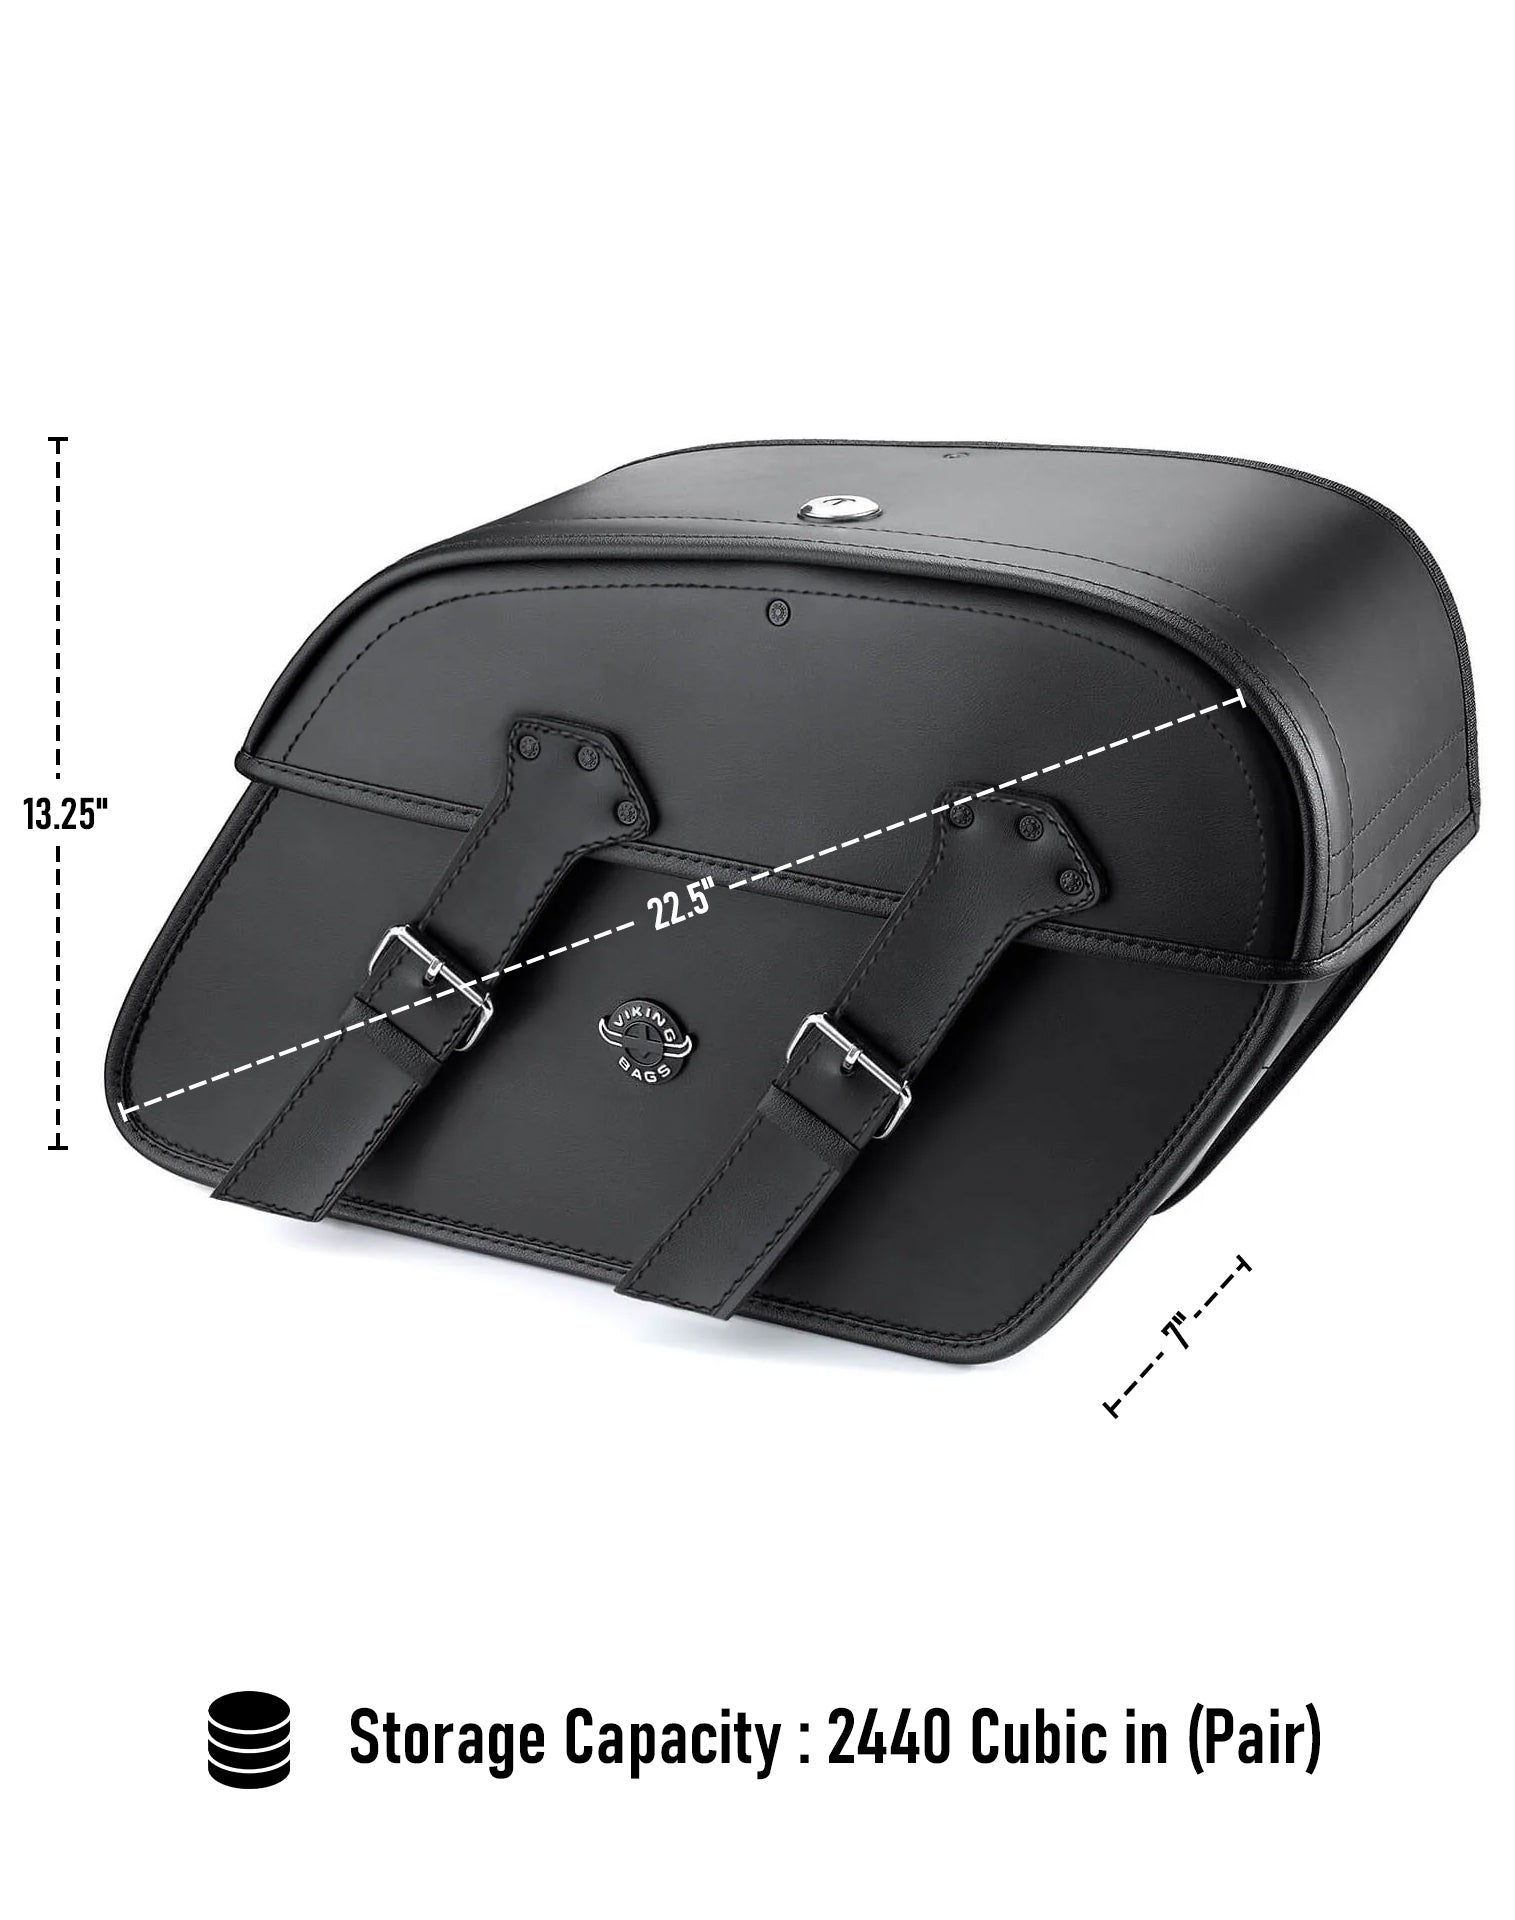 Viking Raven Extra Large Honda Vtx 1800 N Leather Motorcycle Saddlebags Can Store Your Ridings Gears